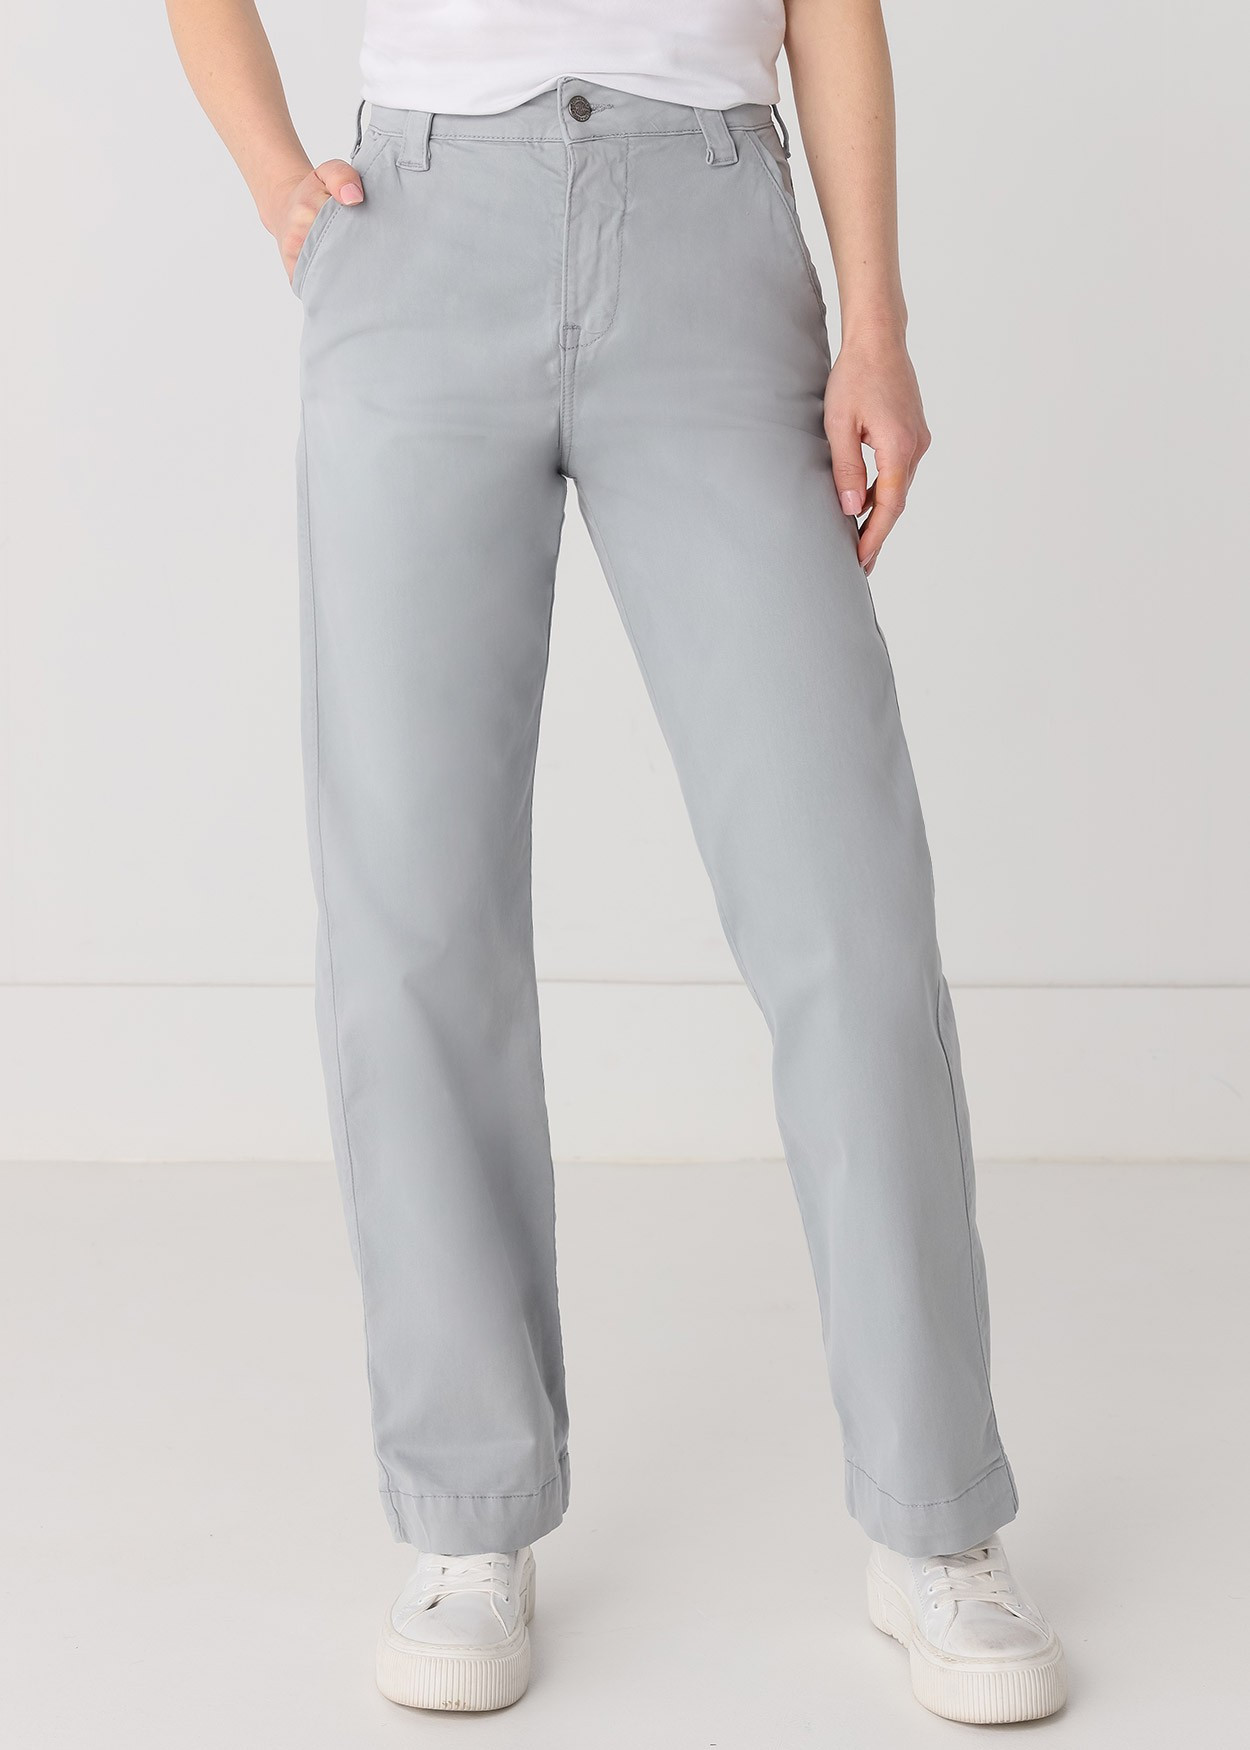 Chino Olivia Nectar | Taille haute - Coupe large droite | Taille en pouces